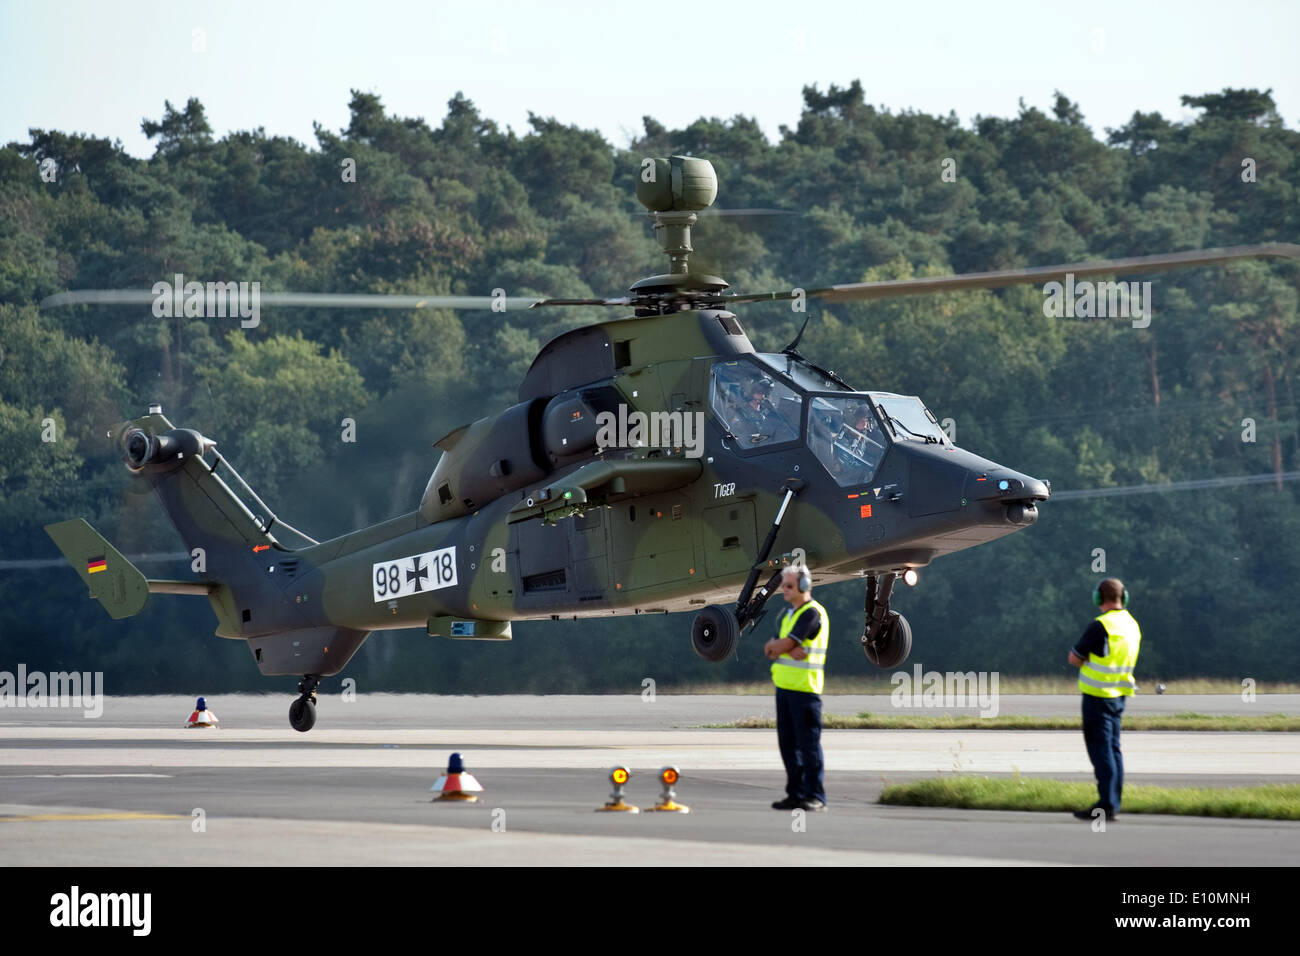 A helicopter of the model 'Eurocopter Tiger' lands on the fairground of the Berlin Air Show (ILA) held at airport Schoenefeld in Berlin, Germany, 11 September 2012. Photo: Robert Schlesinger/picture alliance Stock Photo